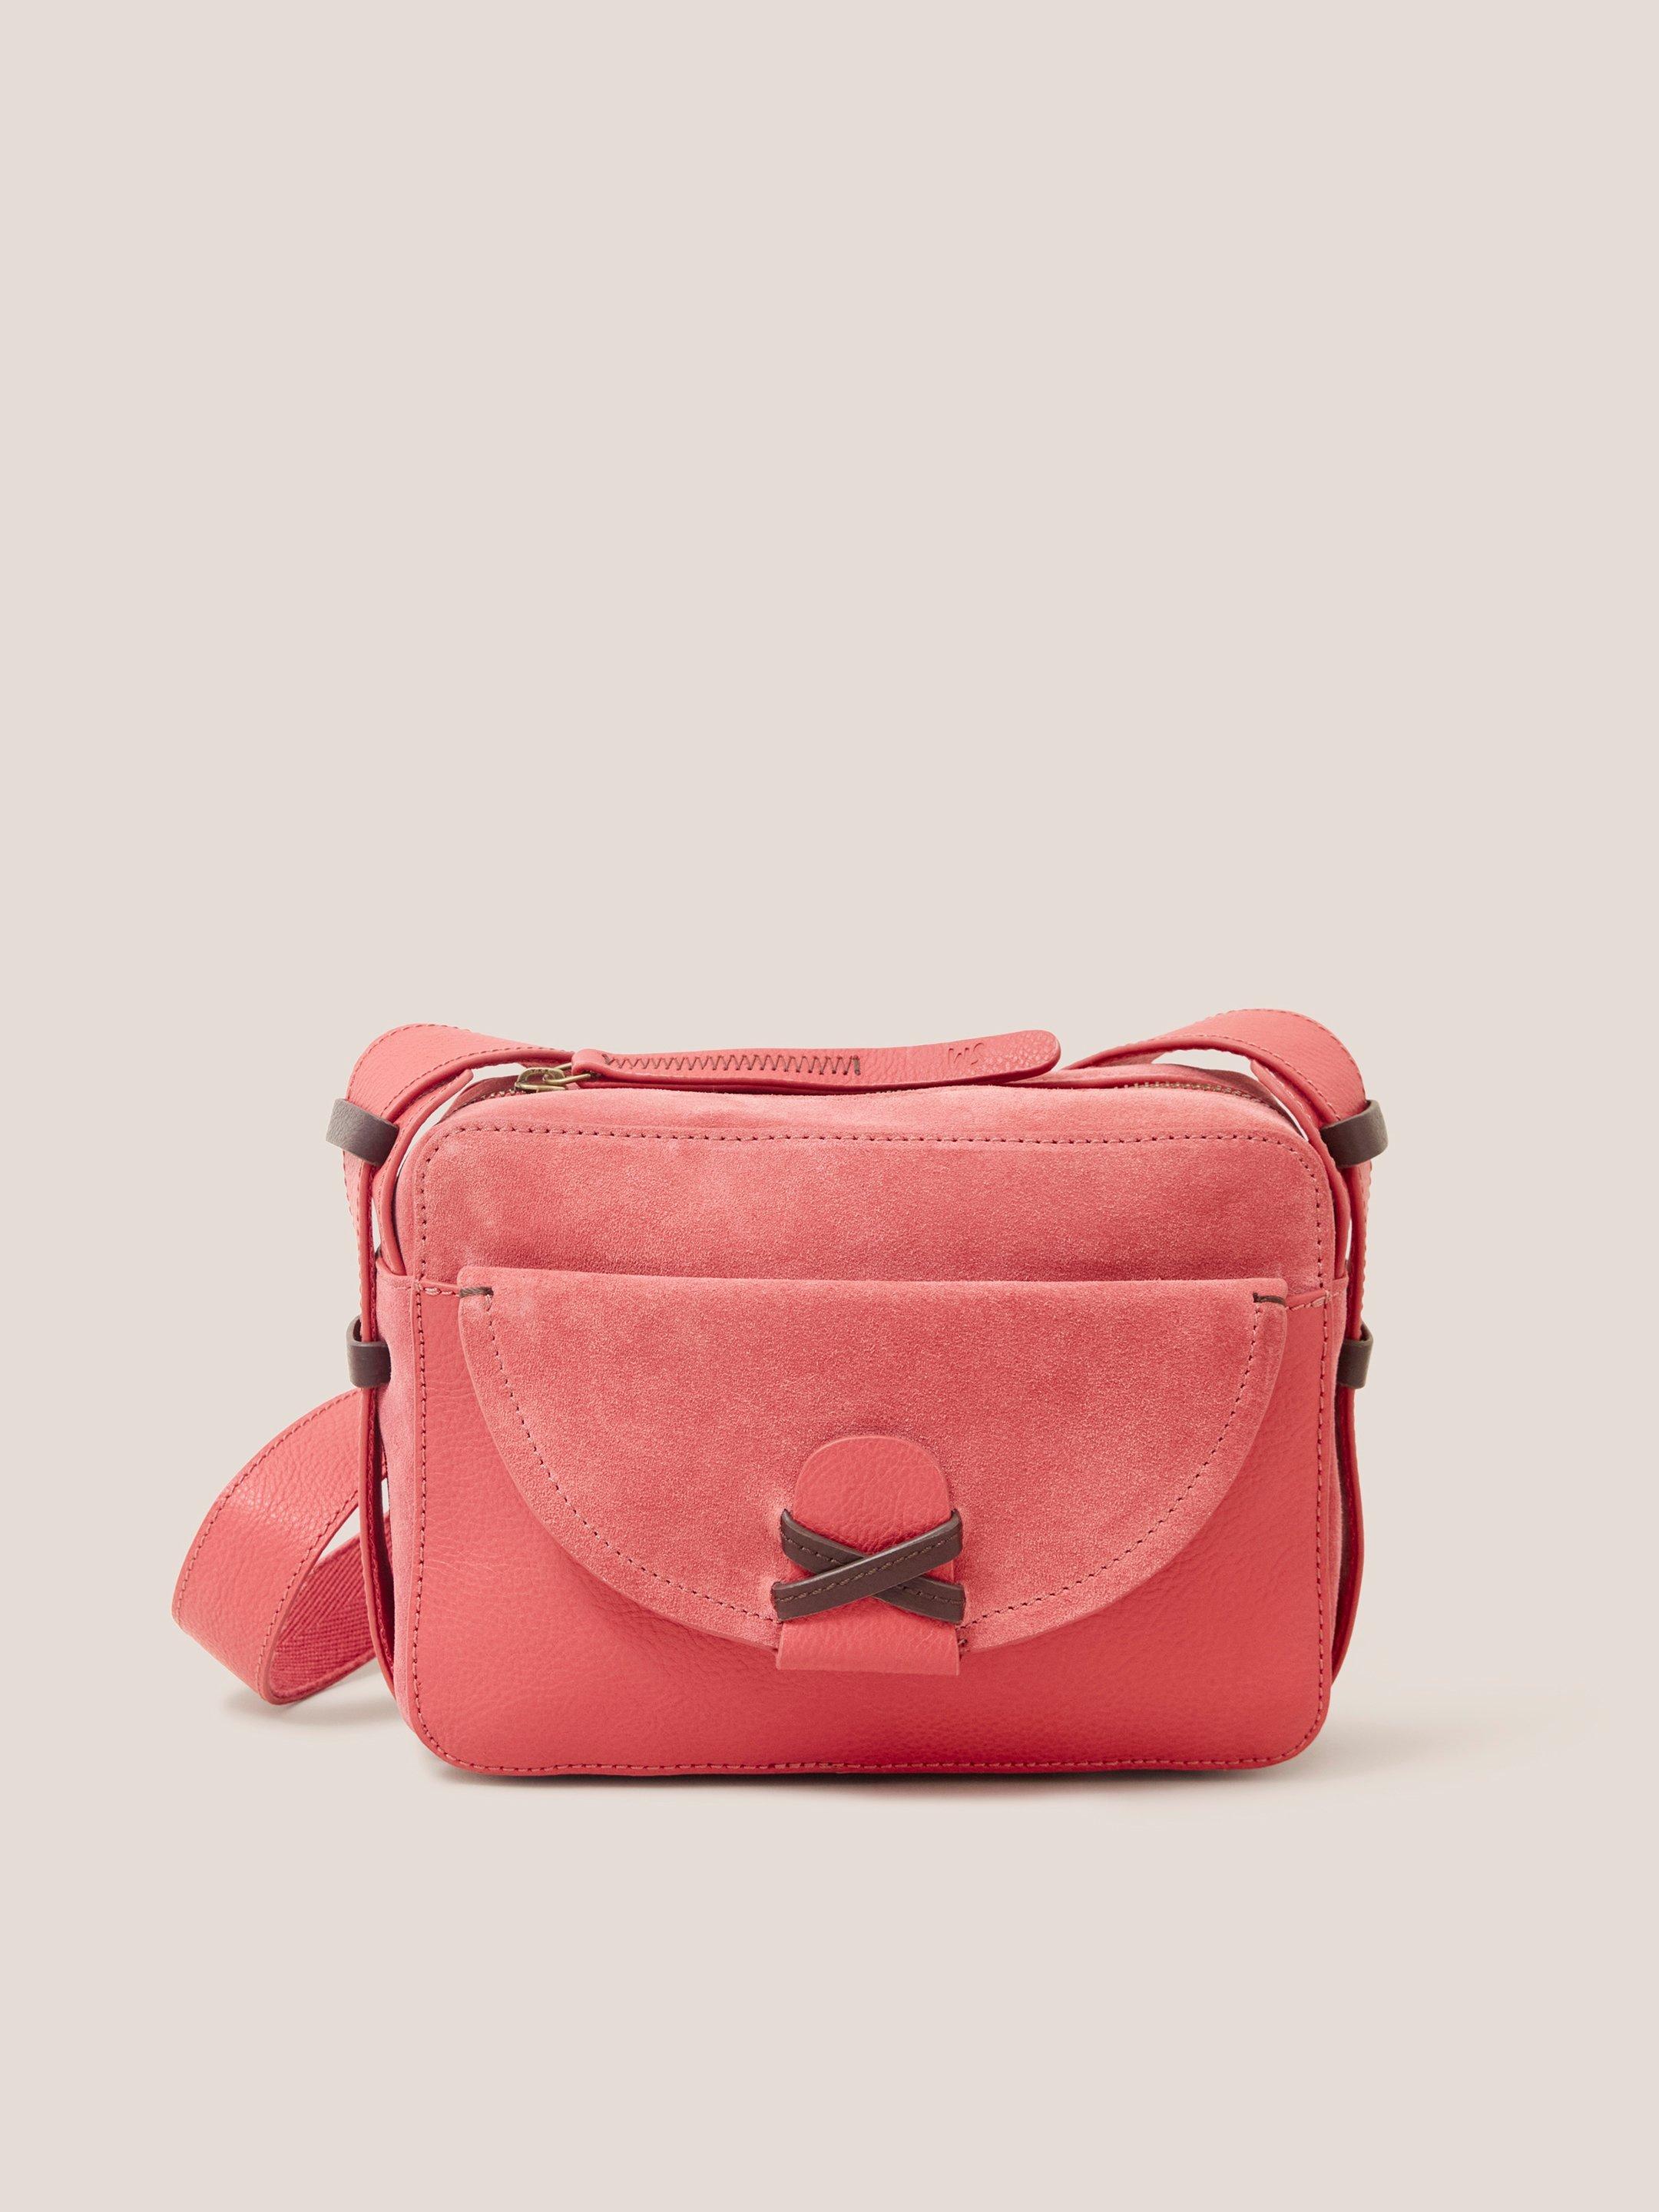 Lola Leather Camera Bag in MID PINK - LIFESTYLE